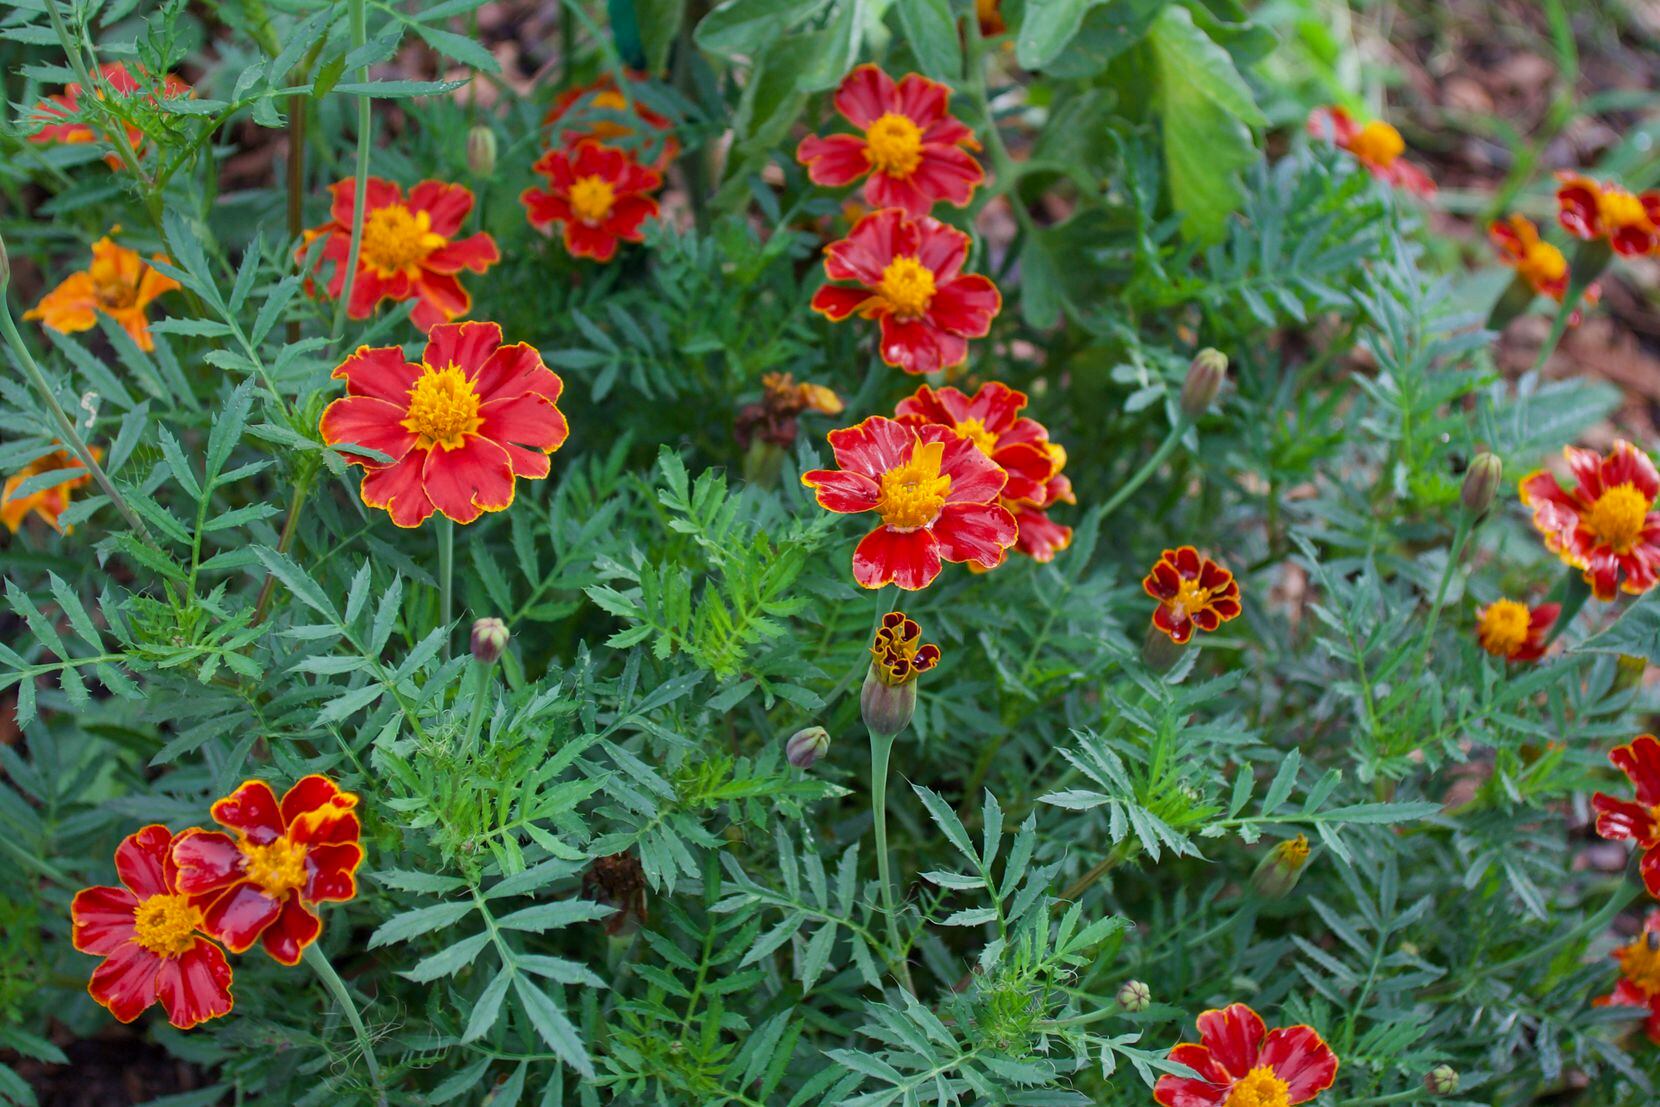 Red marigolds have bright yellow centers.